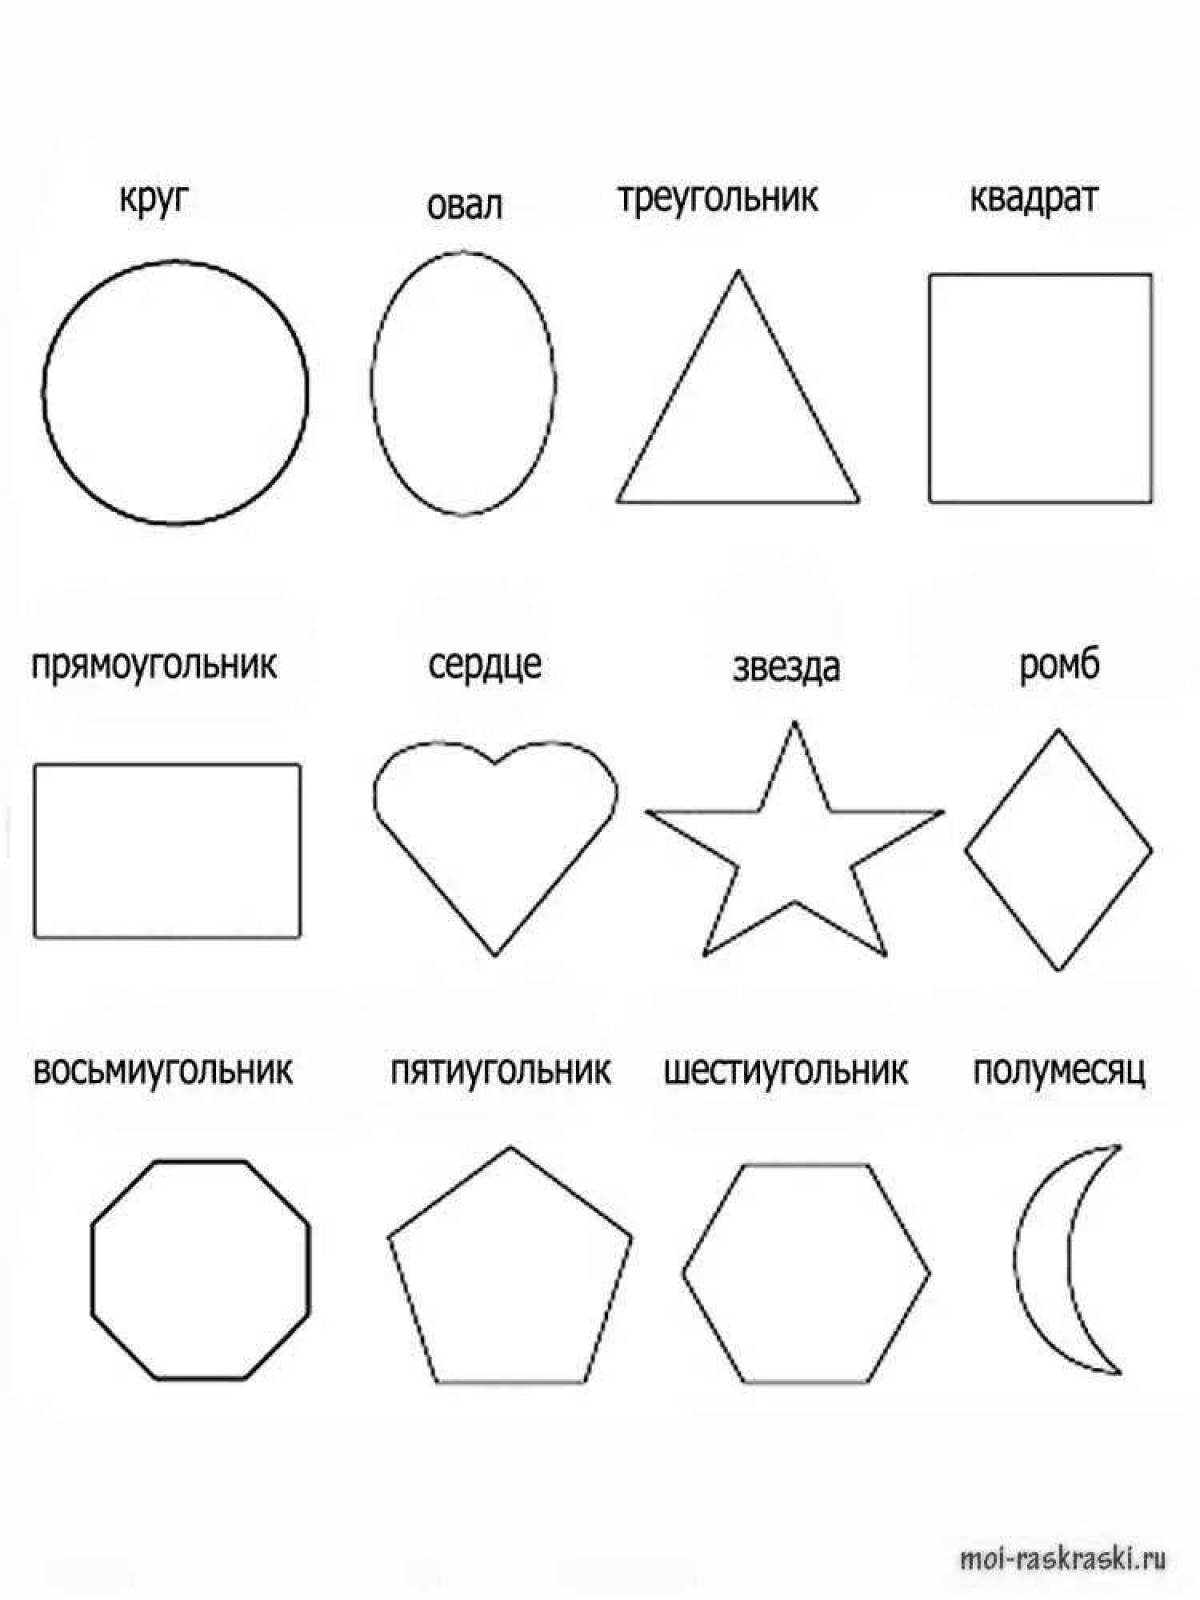 A fascinating coloring of geometric shapes for children 5-6 years old